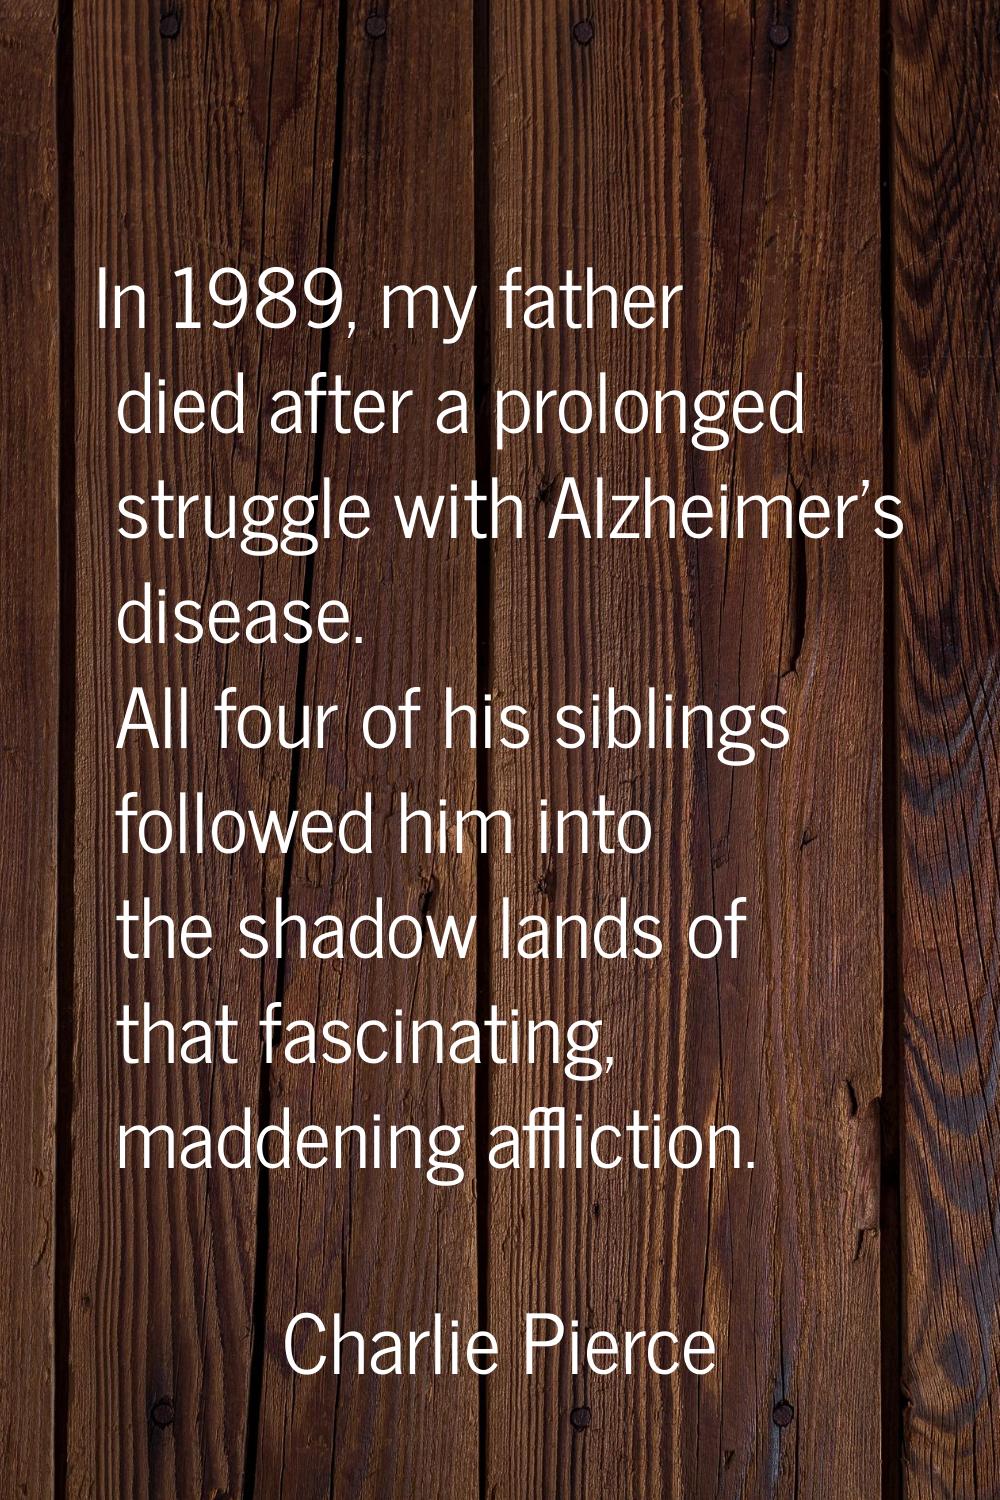 In 1989, my father died after a prolonged struggle with Alzheimer's disease. All four of his siblin